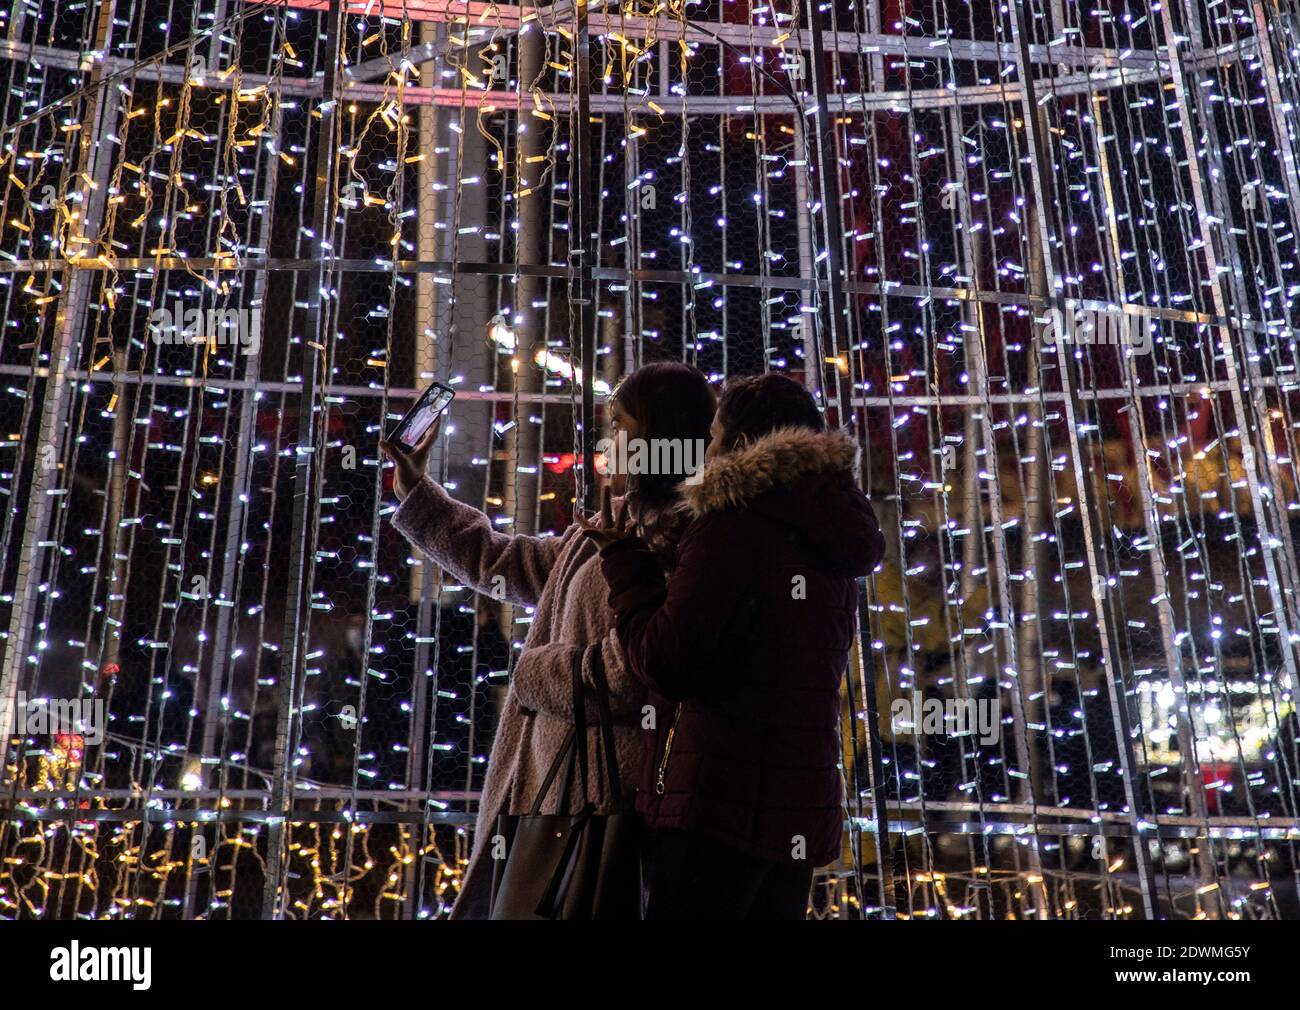 Istanbul, Turkey. 22nd Dec, 2020. People take selfies in front of Christmas decorations in Istanbul, Turkey, Dec. 22, 2020. TO GO WITH 'Feature: Turkey counts down to New Year celebration amid pandemic' Credit: Osman Orsal/Xinhua/Alamy Live News Stock Photo